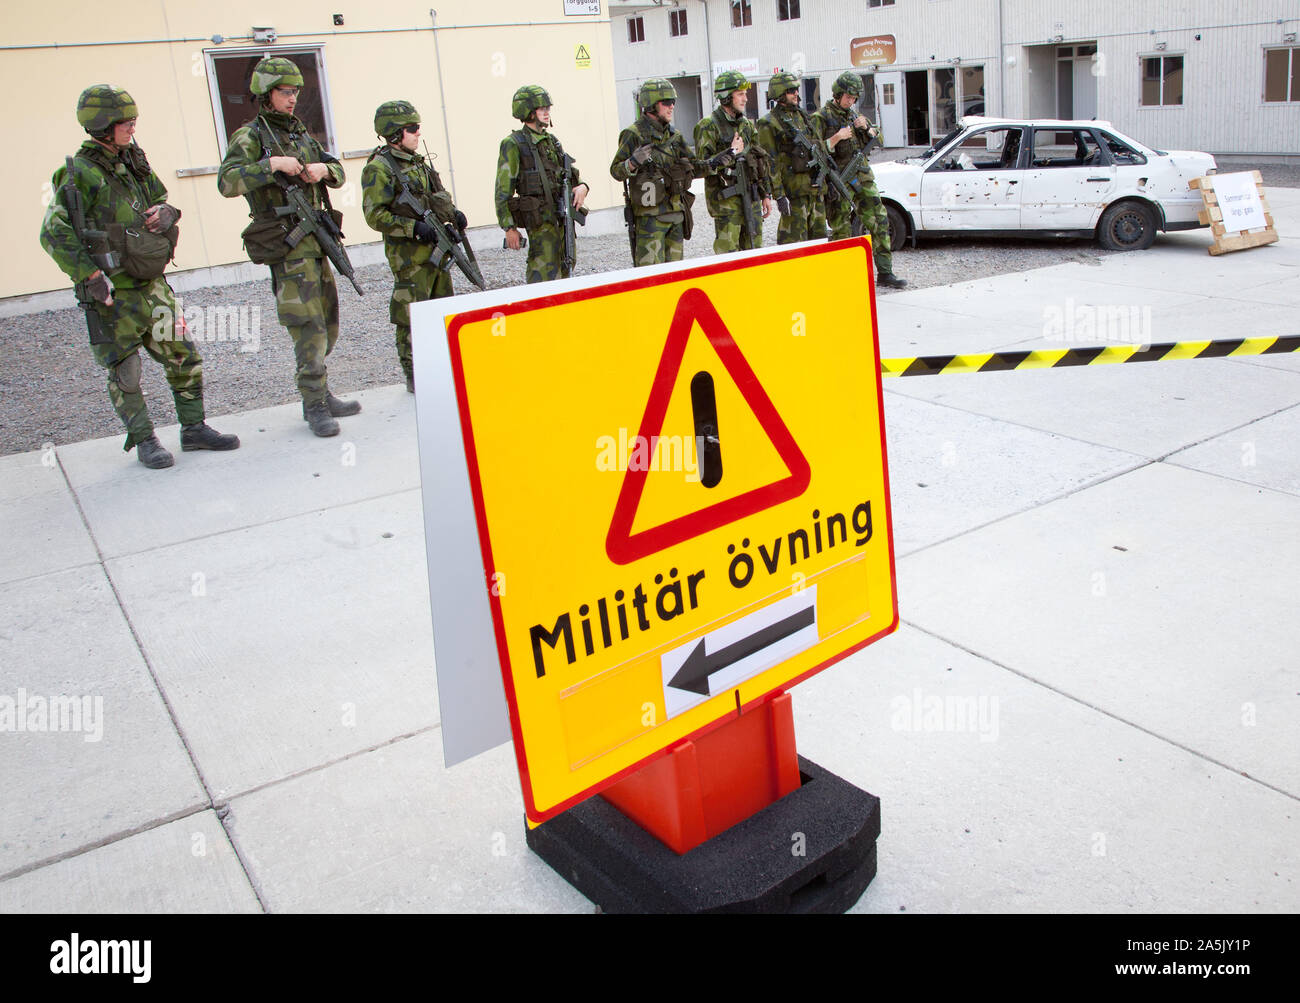 For fifty years, the Swedish Armed Forces has been operating in Kvarn, just outside Motala. On Saturday, the public was invited to an open house.Here you can see the soldiers in STA MOUT, which is a combat training facility consisting of an urban environment. Photo Jeppe Gustafsson Stock Photo